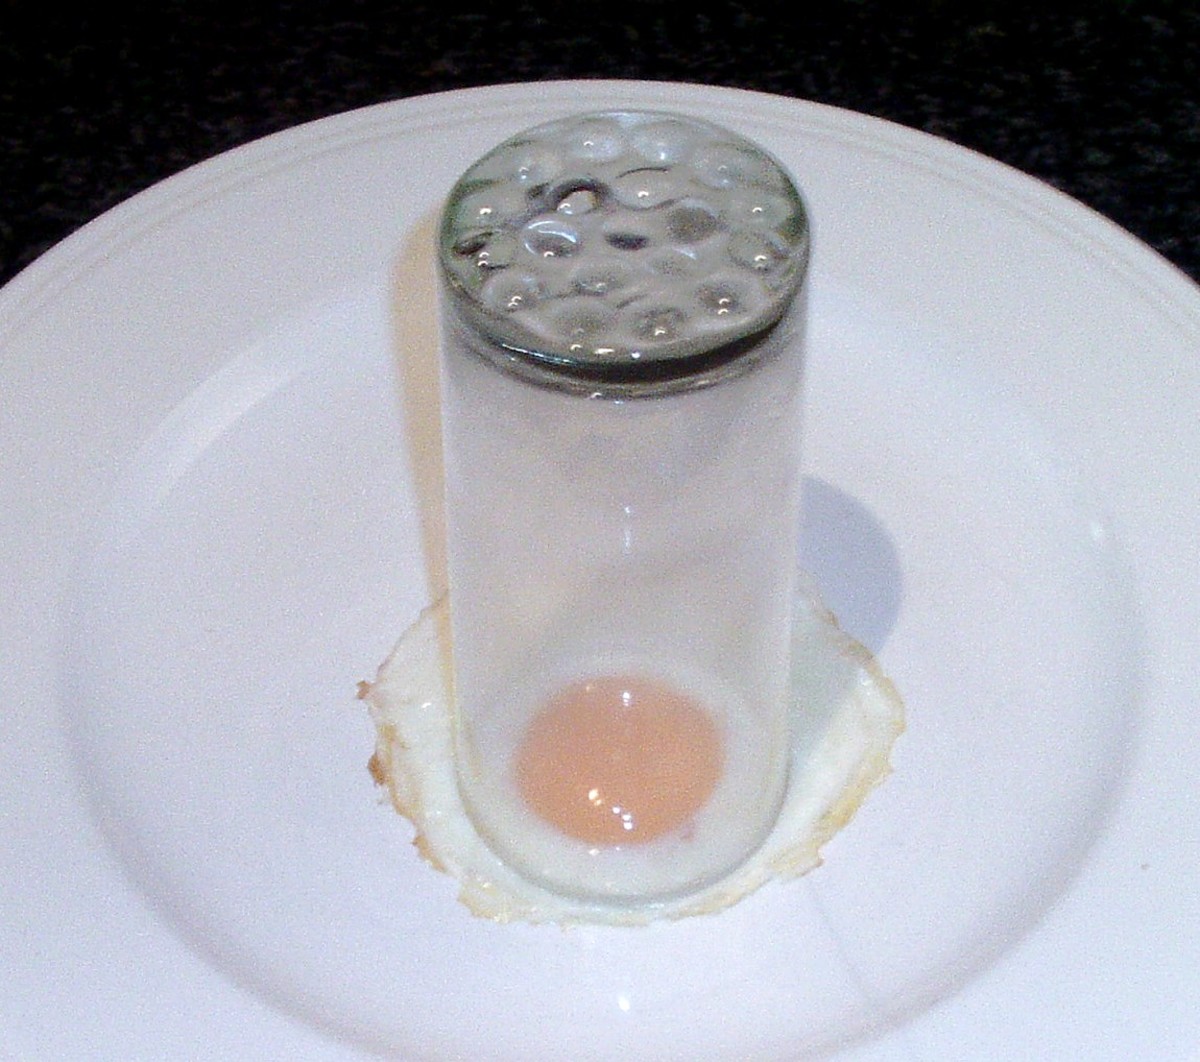 Small diameter drinking glass is used to cut circle from fried egg